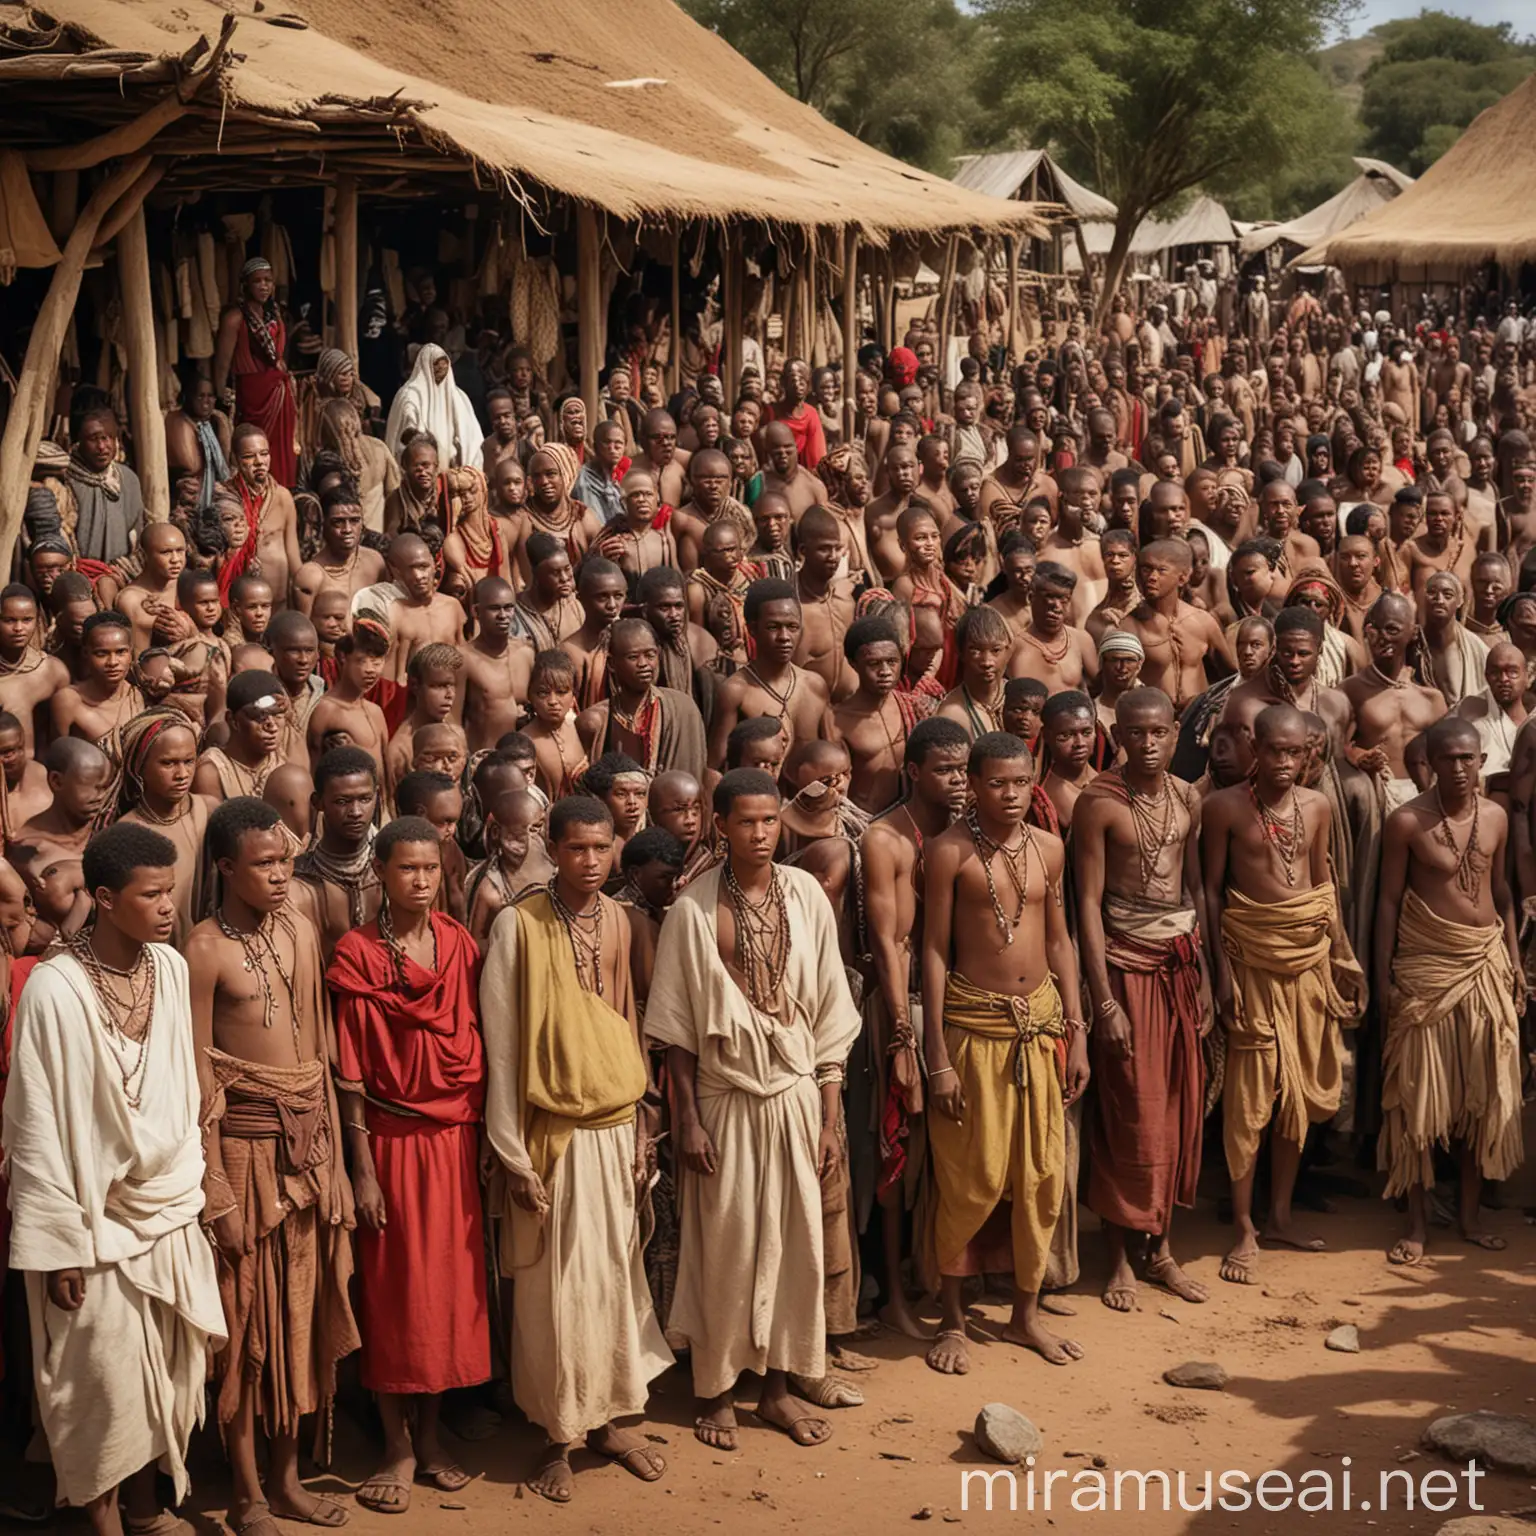 A group of people featuring all the races and ethnicities in Africa and other negroid people, bantu, amazigh,  maasai, Malagasy, khoisan, Ethiopid,  aboriginals, papuams, melanesians, pygmy, in a market place